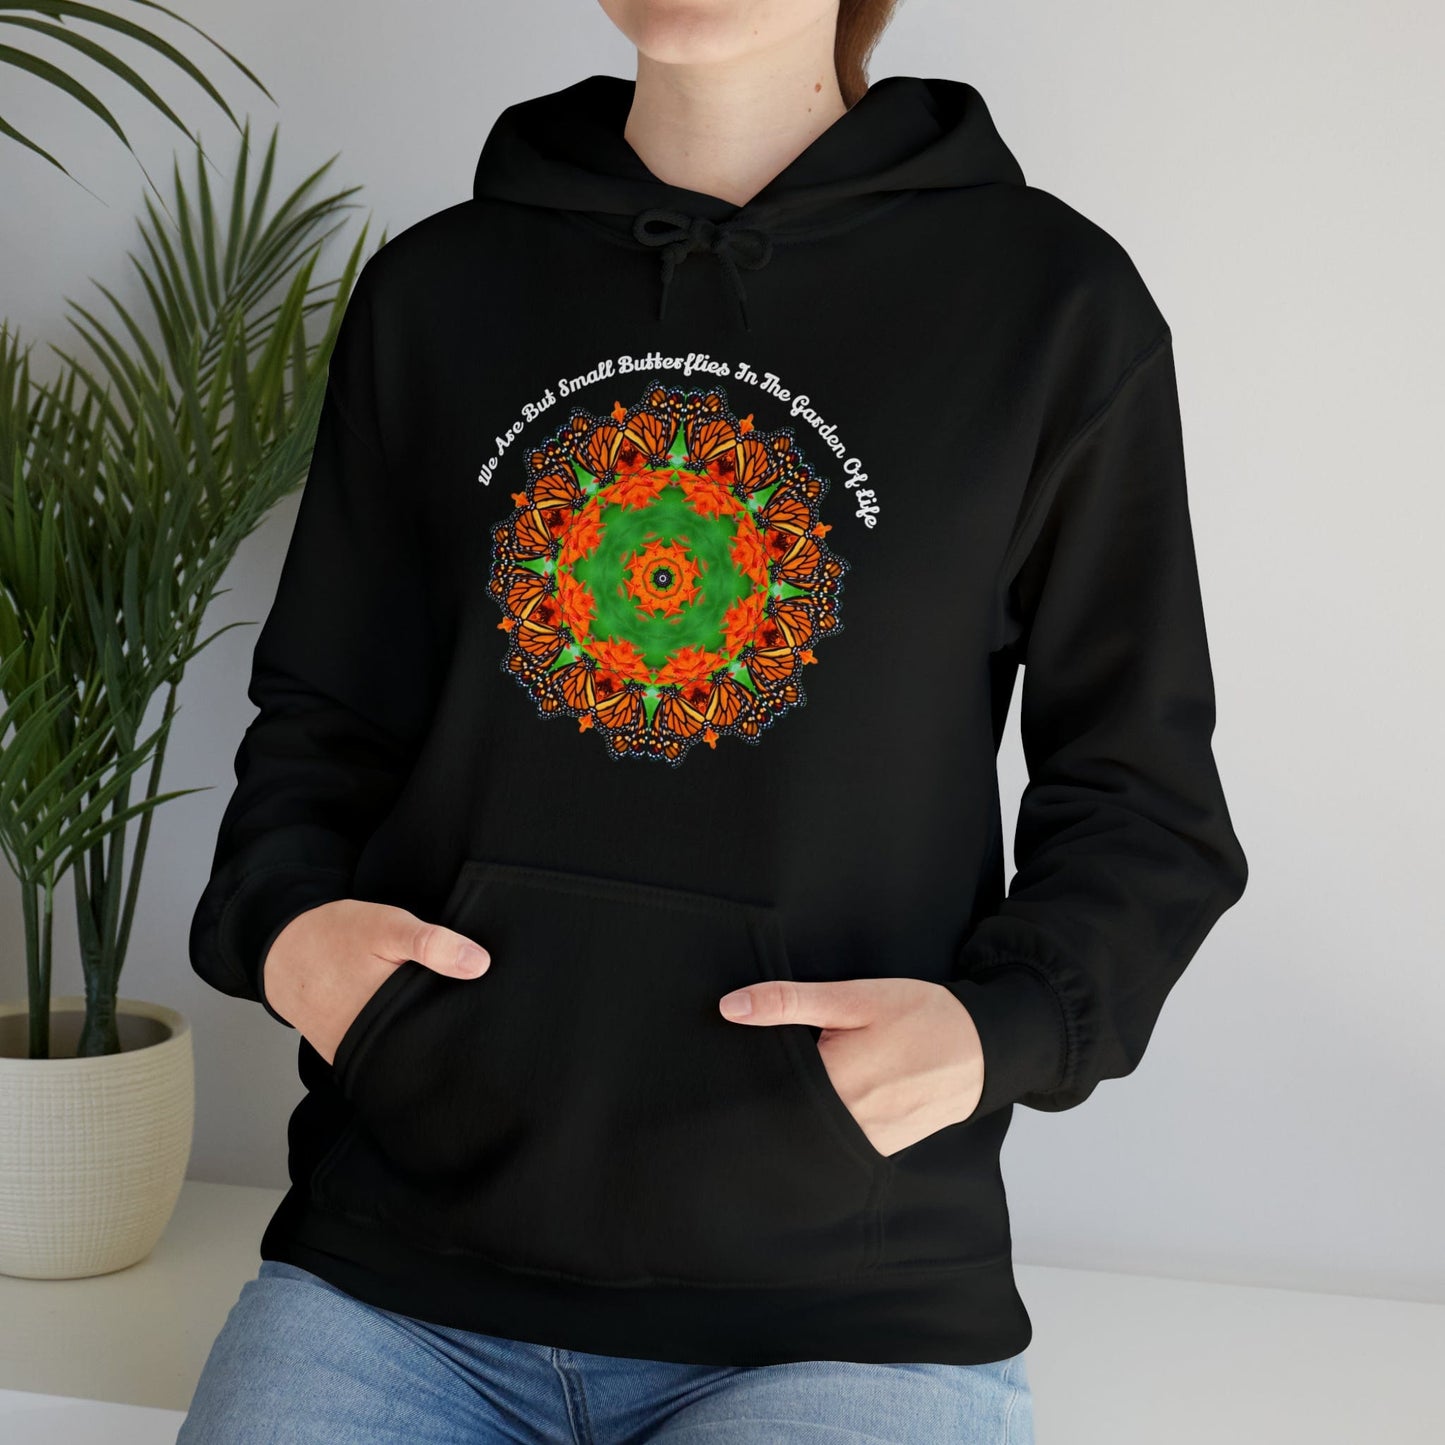 Pretty & Cute Butterfly Motivational Graphic Hoodie Sweatshirt Monarch Butterfly Mandala Art We Are But Small Butterflies In The Garden Of Life Black